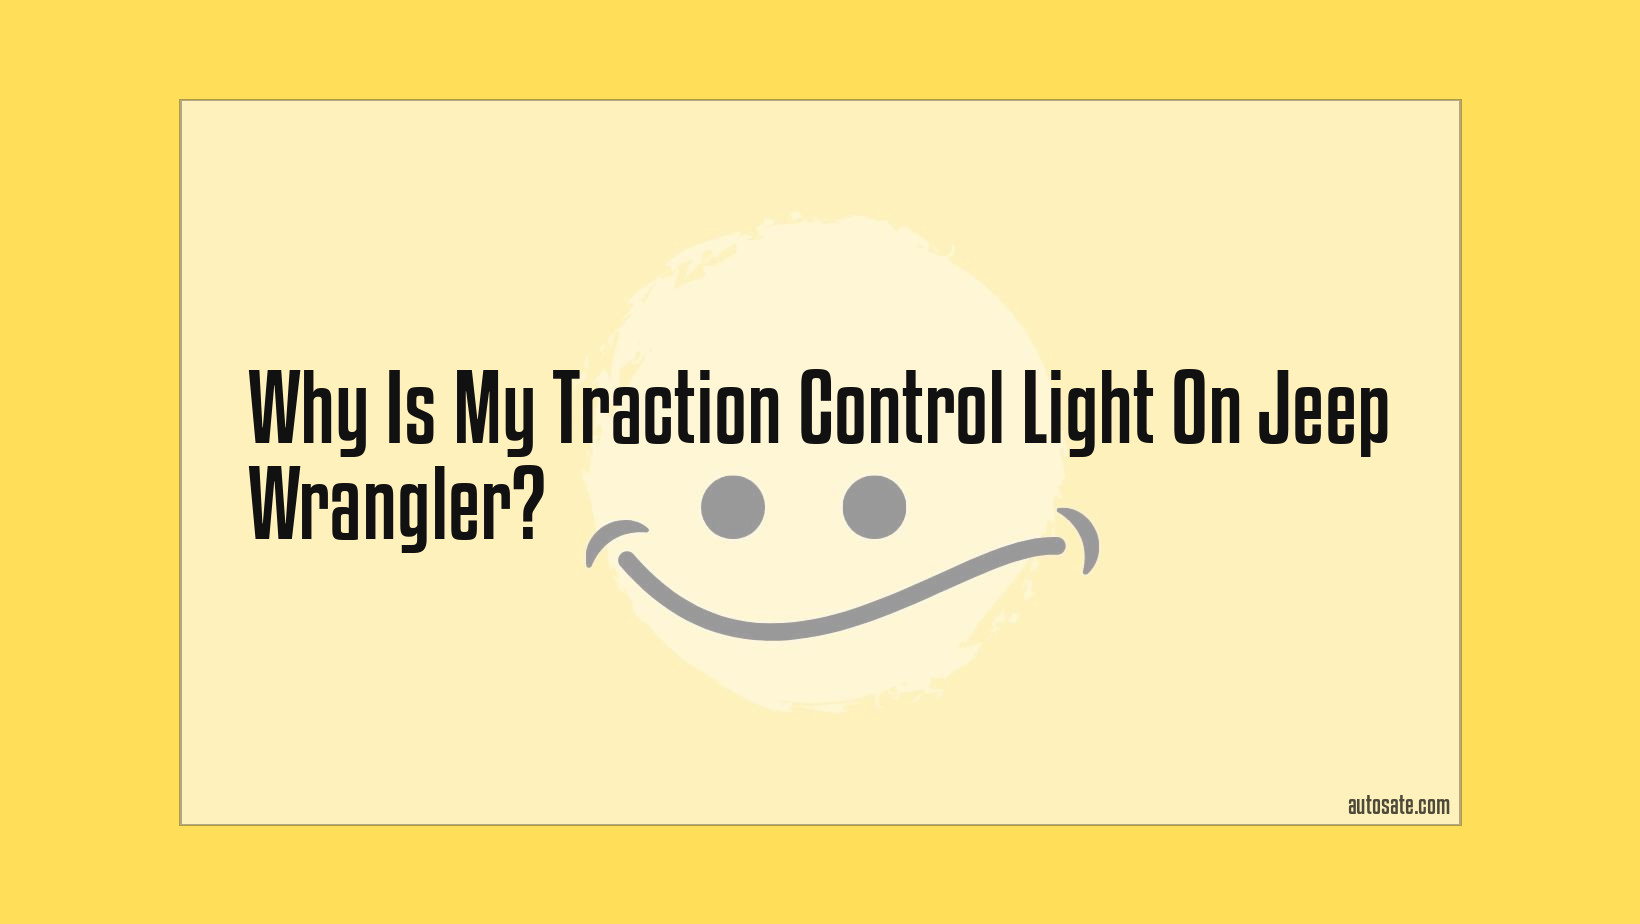 Why Is My Traction Control Light On Jeep Wrangler